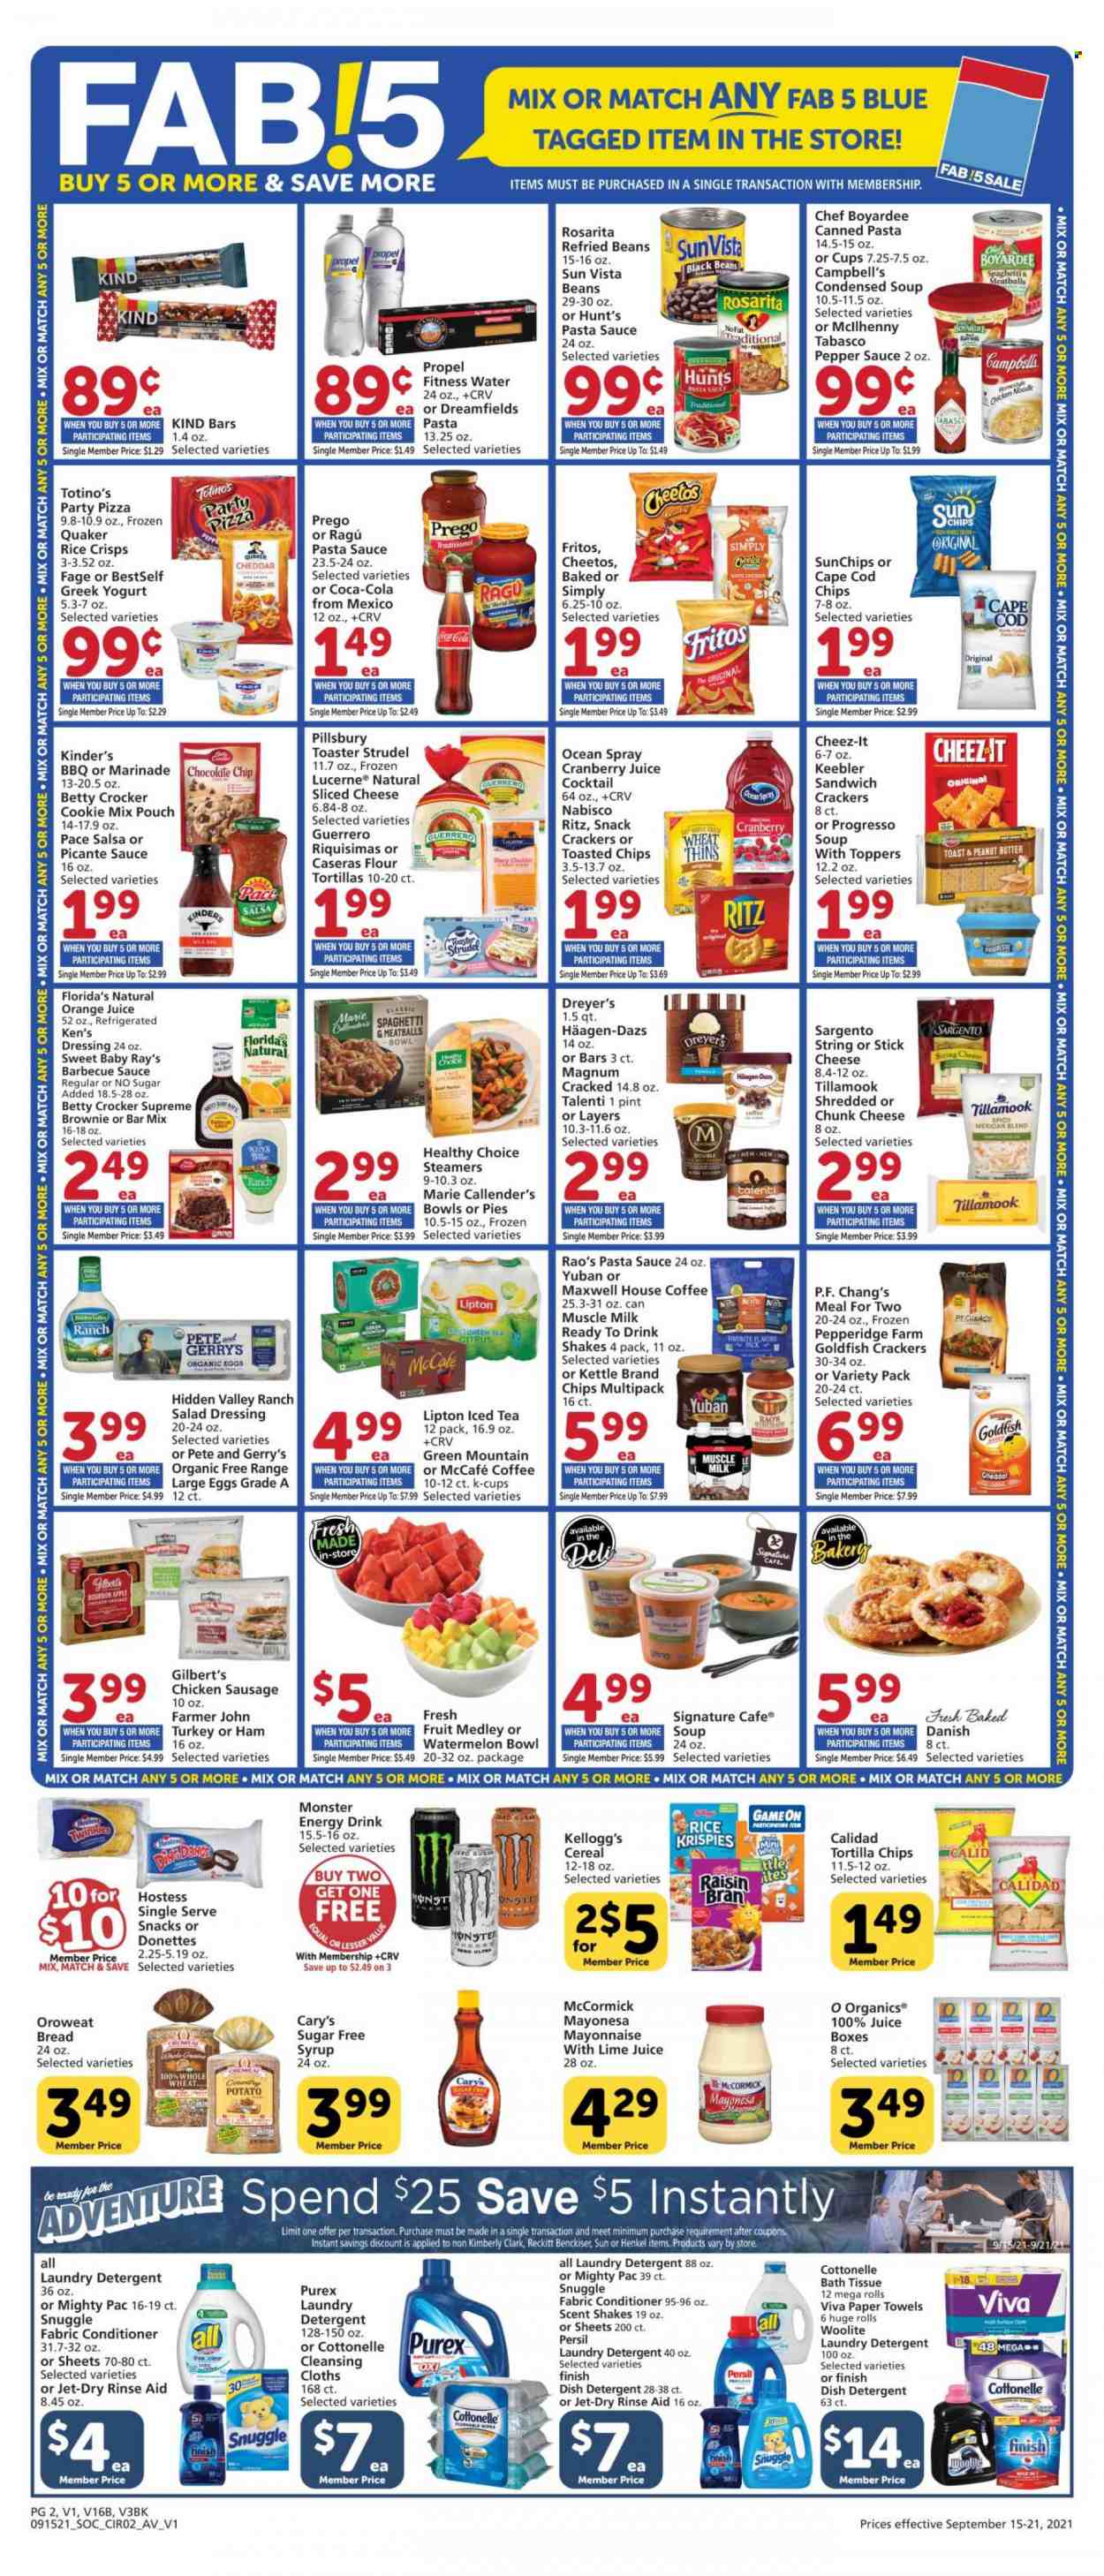 thumbnail - Vons Flyer - 09/15/2021 - 09/21/2021 - Sales products - bread, strudel, flour tortillas, brownies, watermelon, cod, Campbell's, spaghetti, pizza, pasta sauce, meatballs, condensed soup, sauce, Pillsbury, Quaker, instant soup, Progresso, Healthy Choice, Marie Callender's, ragú pasta, sausage, chicken sausage, Gilbert’s, sliced cheese, chunk cheese, Sargento, greek yoghurt, yoghurt, milk, shake, muscle milk, large eggs, mayonnaise, Magnum, Häagen-Dazs, Talenti Gelato, cheese sticks, snack, crackers, Kellogg's, Florida's Natural, Keebler, RITZ, Fritos, tortilla chips, Cheetos, Thins, Goldfish, Cheez-It, rice crisps, tabasco, black beans, refried beans, Chef Boyardee, cereals, Rice Krispies, BBQ sauce, salad dressing, dressing, salsa, marinade, ragu, peanut butter, syrup, Coca-Cola, cranberry juice, orange juice, energy drink, Monster, Lipton, ice tea, Maxwell House, coffee, coffee capsules, McCafe, K-Cups, Green Mountain, bourbon, wipes, bath tissue, Cottonelle, kitchen towels, paper towels, detergent, Woolite, Snuggle, Persil, laundry detergent, Purex, Jet. Page 2.